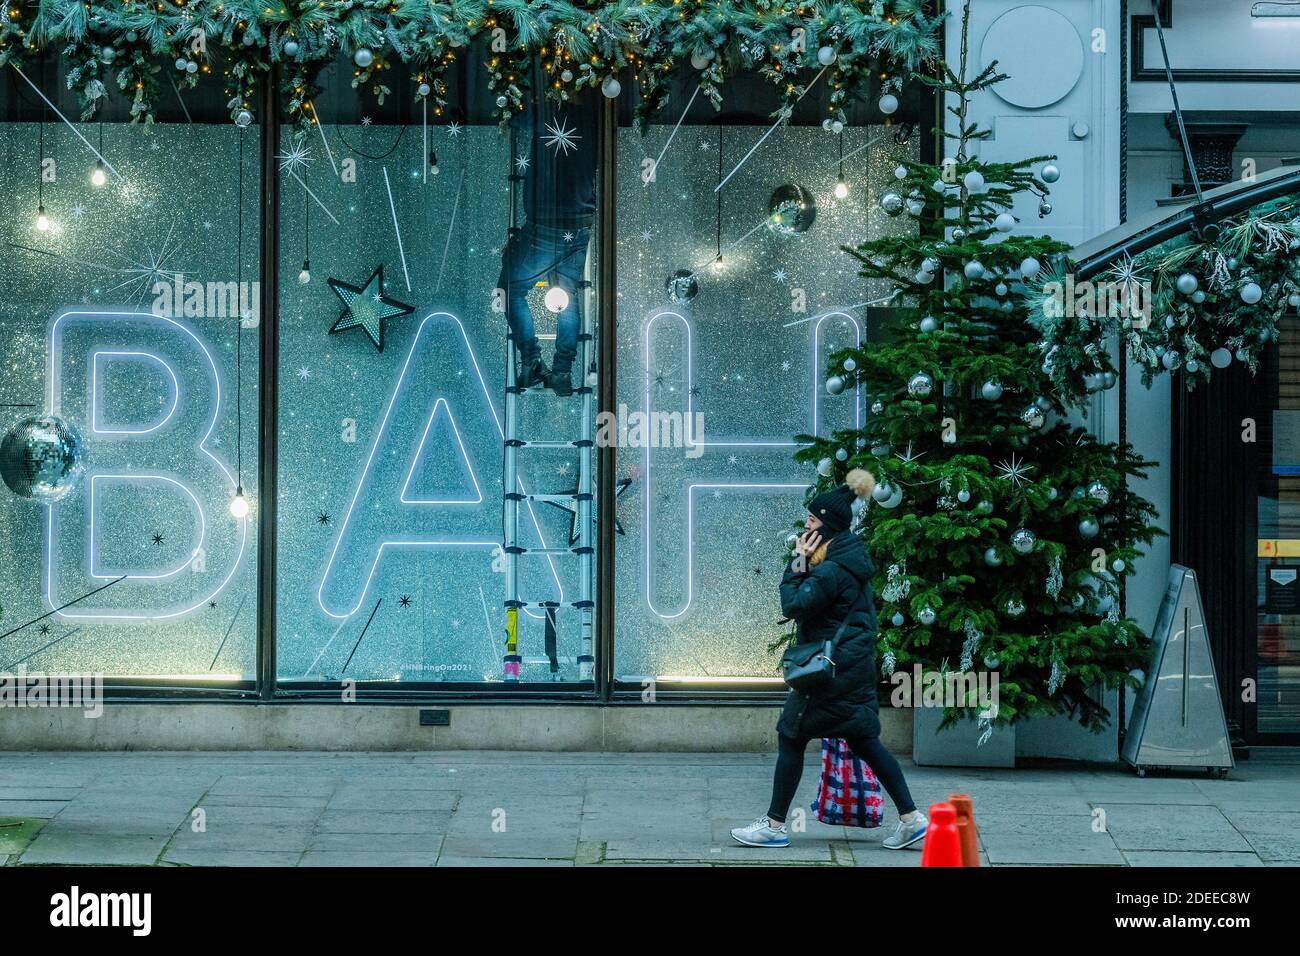 London, UK. 30th Nov, 2020. Harvey Nichols makes final adjustments to its window messages - Bah Humbug and Bring on 2021. Closed retailers do their best to promote Christmas sales. People are still out in central london, and prepare to re-open as the second lockdown nears its end. The Christmas lights are on but the shops are shut. Many people wear masks, even outside. Credit: Guy Bell/Alamy Live News Stock Photo